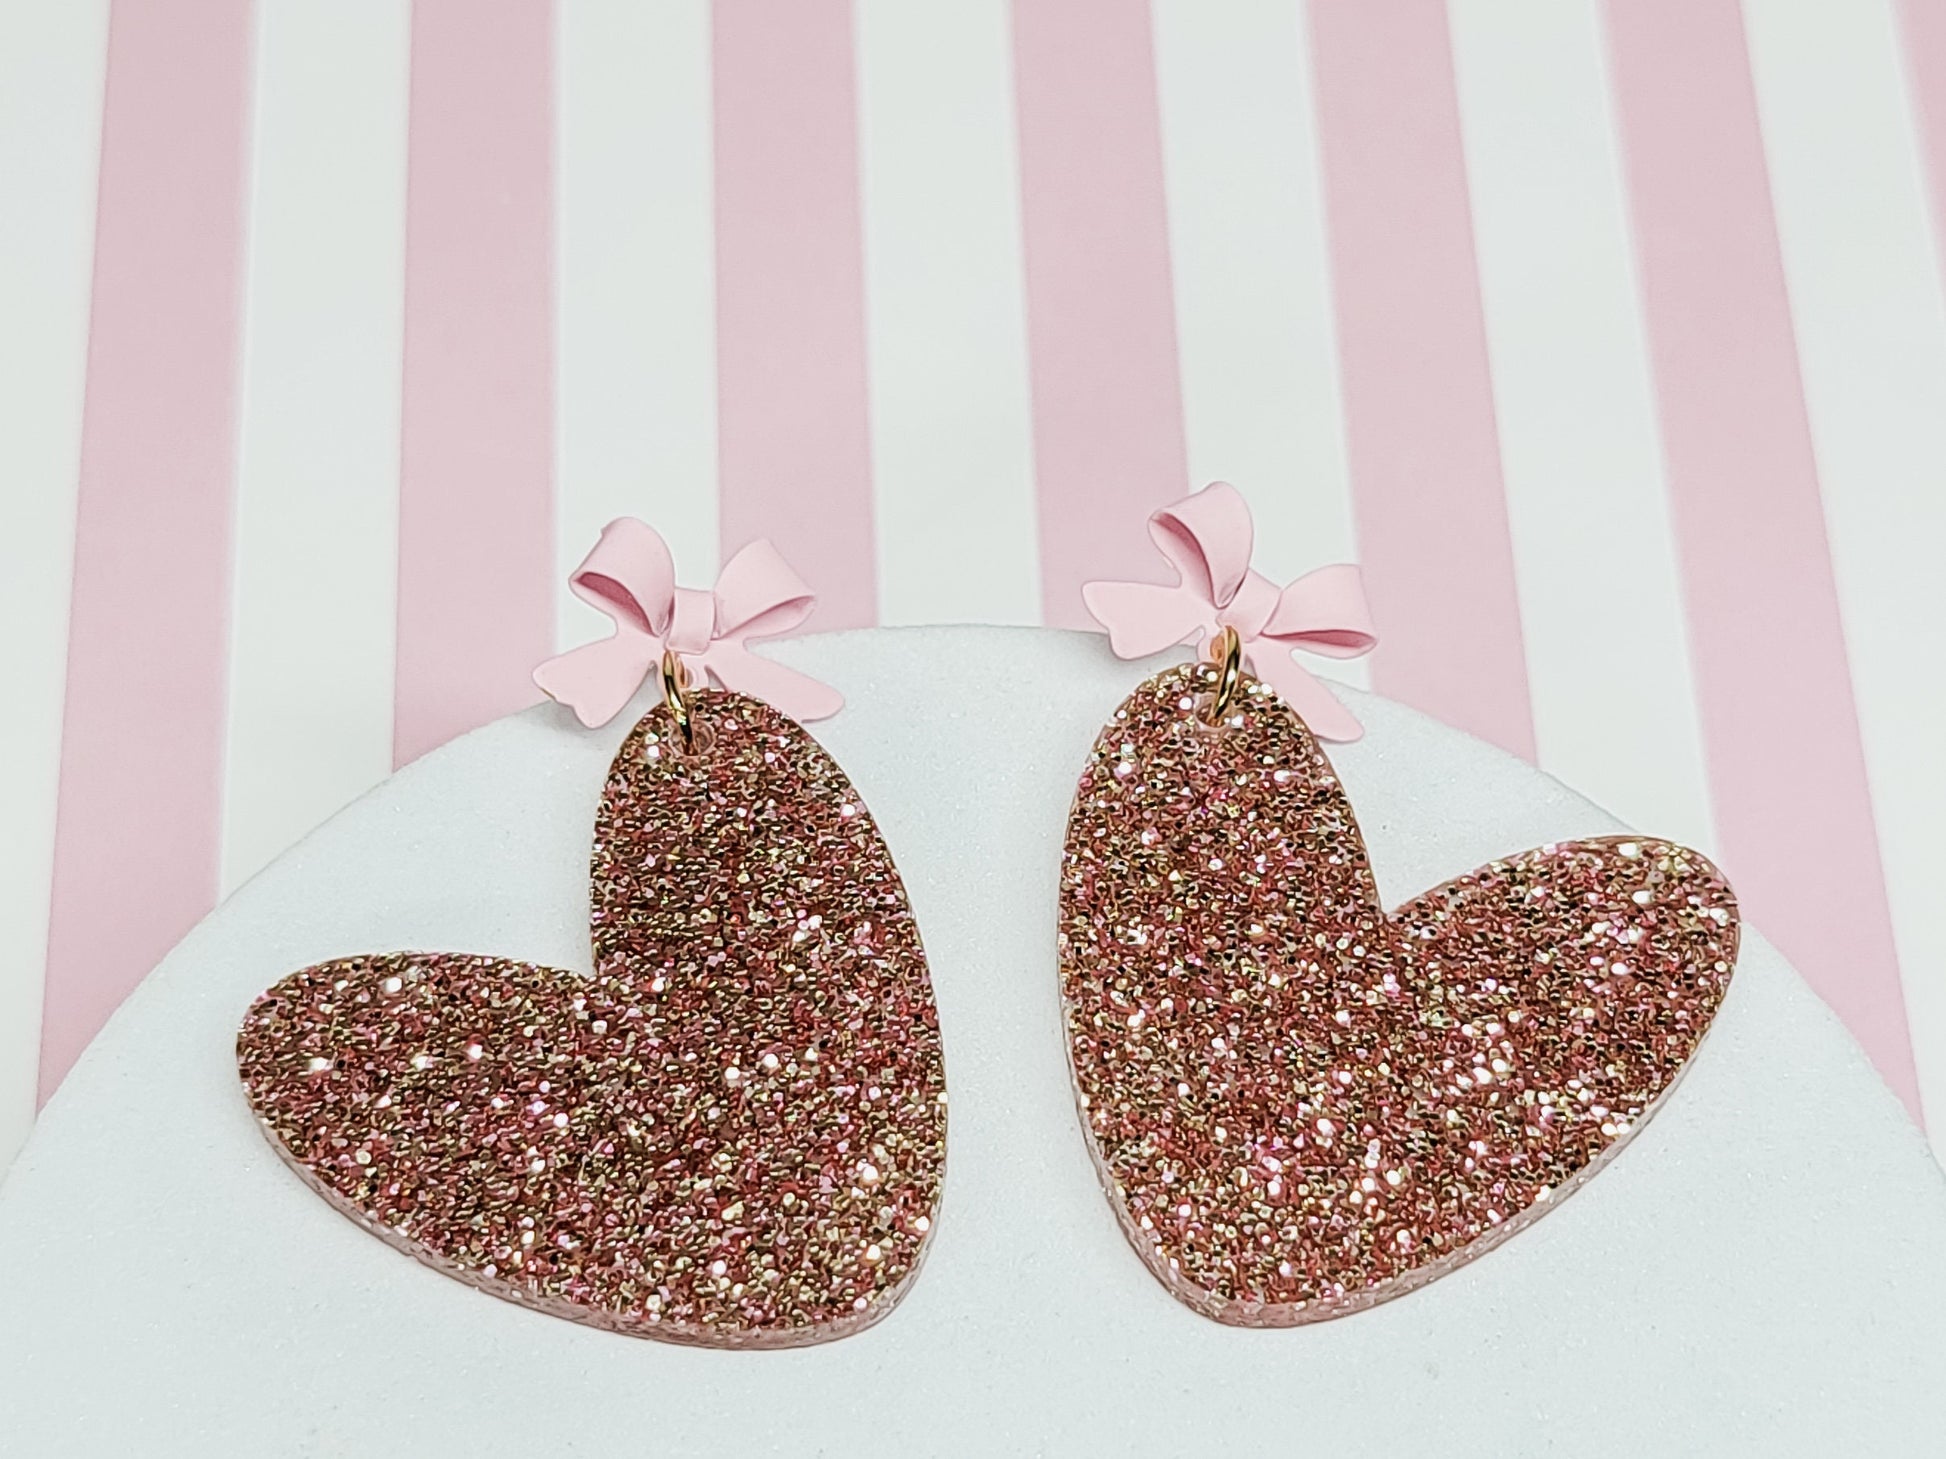 Big Iridescent Lace Heart Doily Valentine's Day Acrylic Dangle Earrings ⋆  It's Just So You